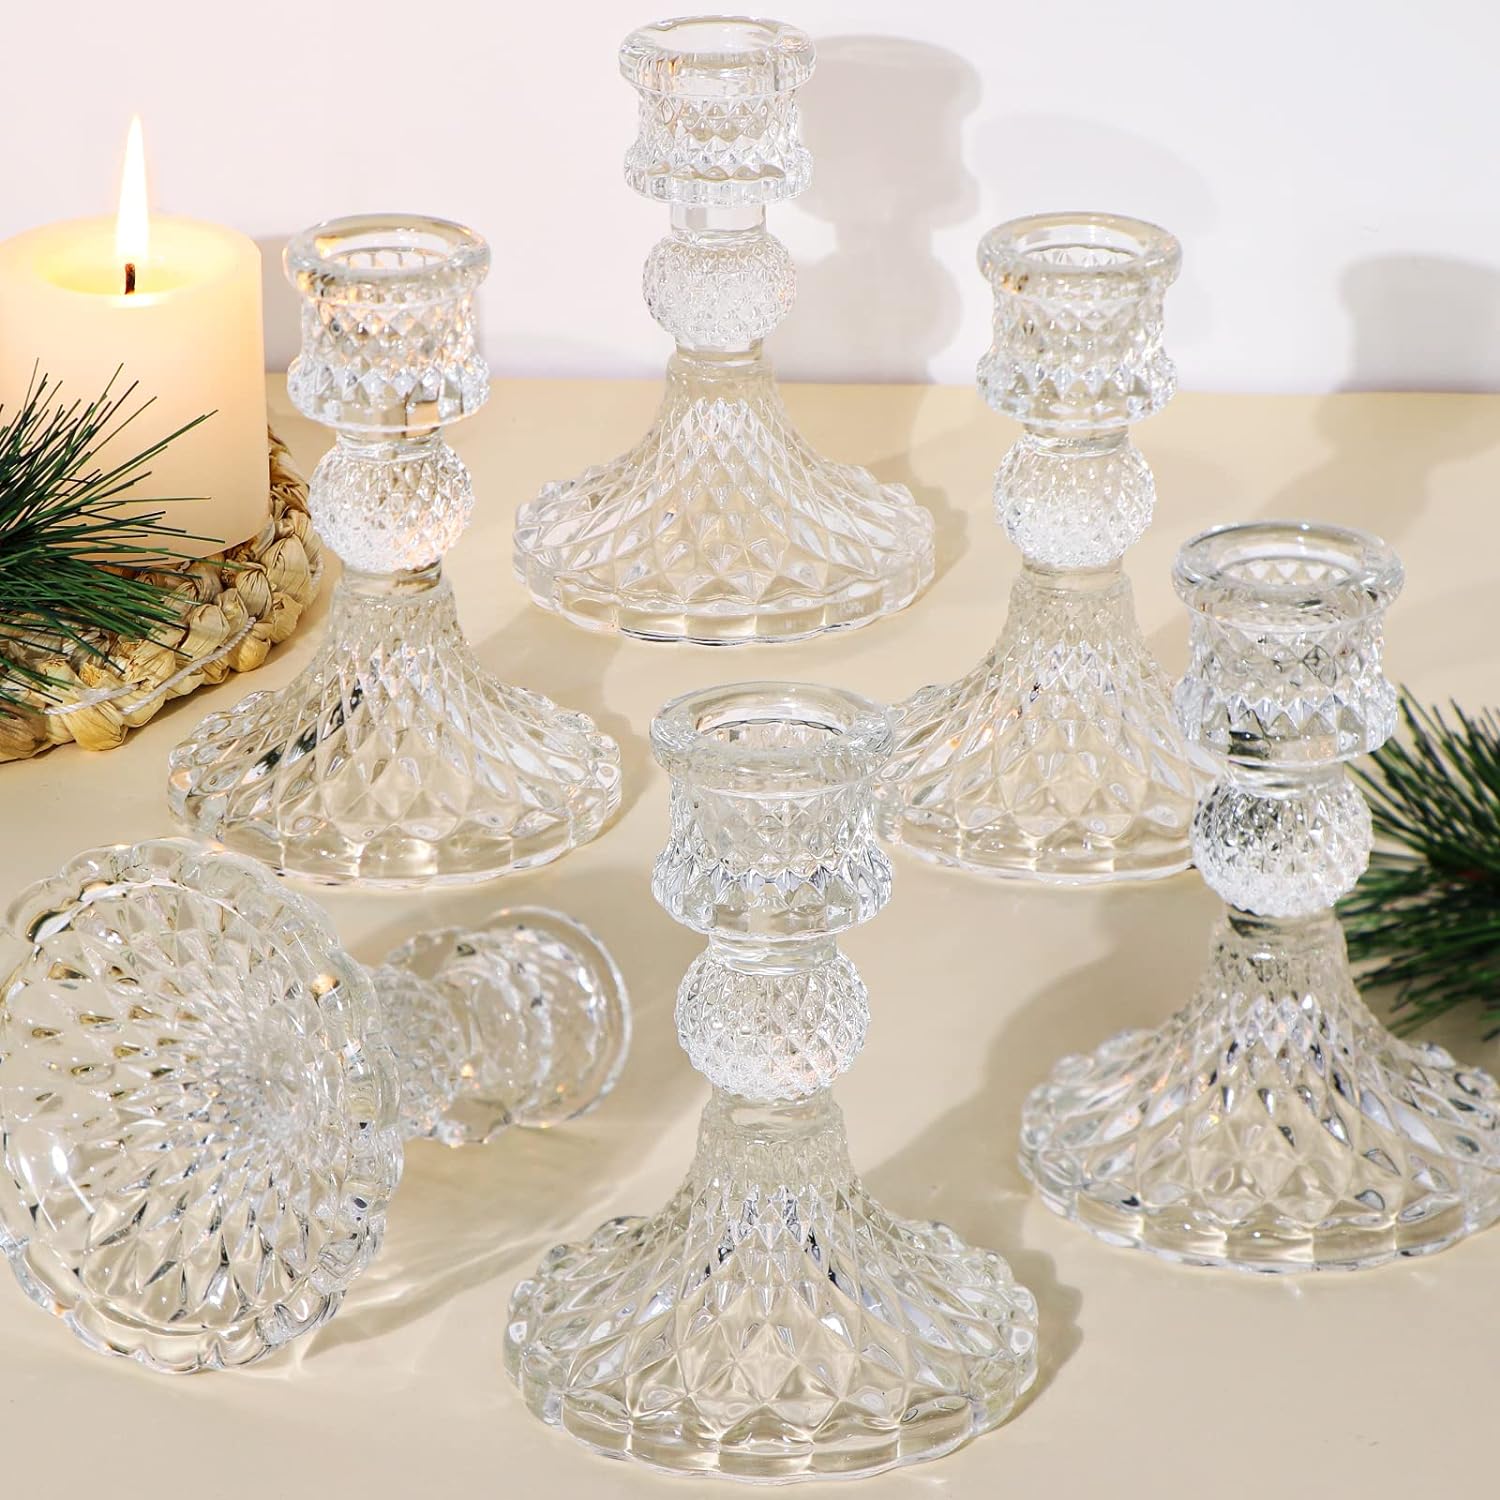 Bulk 6 Pcs Clear Taper Candle Holder Set for Wedding Table Decor Valentine's Day Decor Anniversaries Bridal Showers and Home Party Table Decor Wholesale